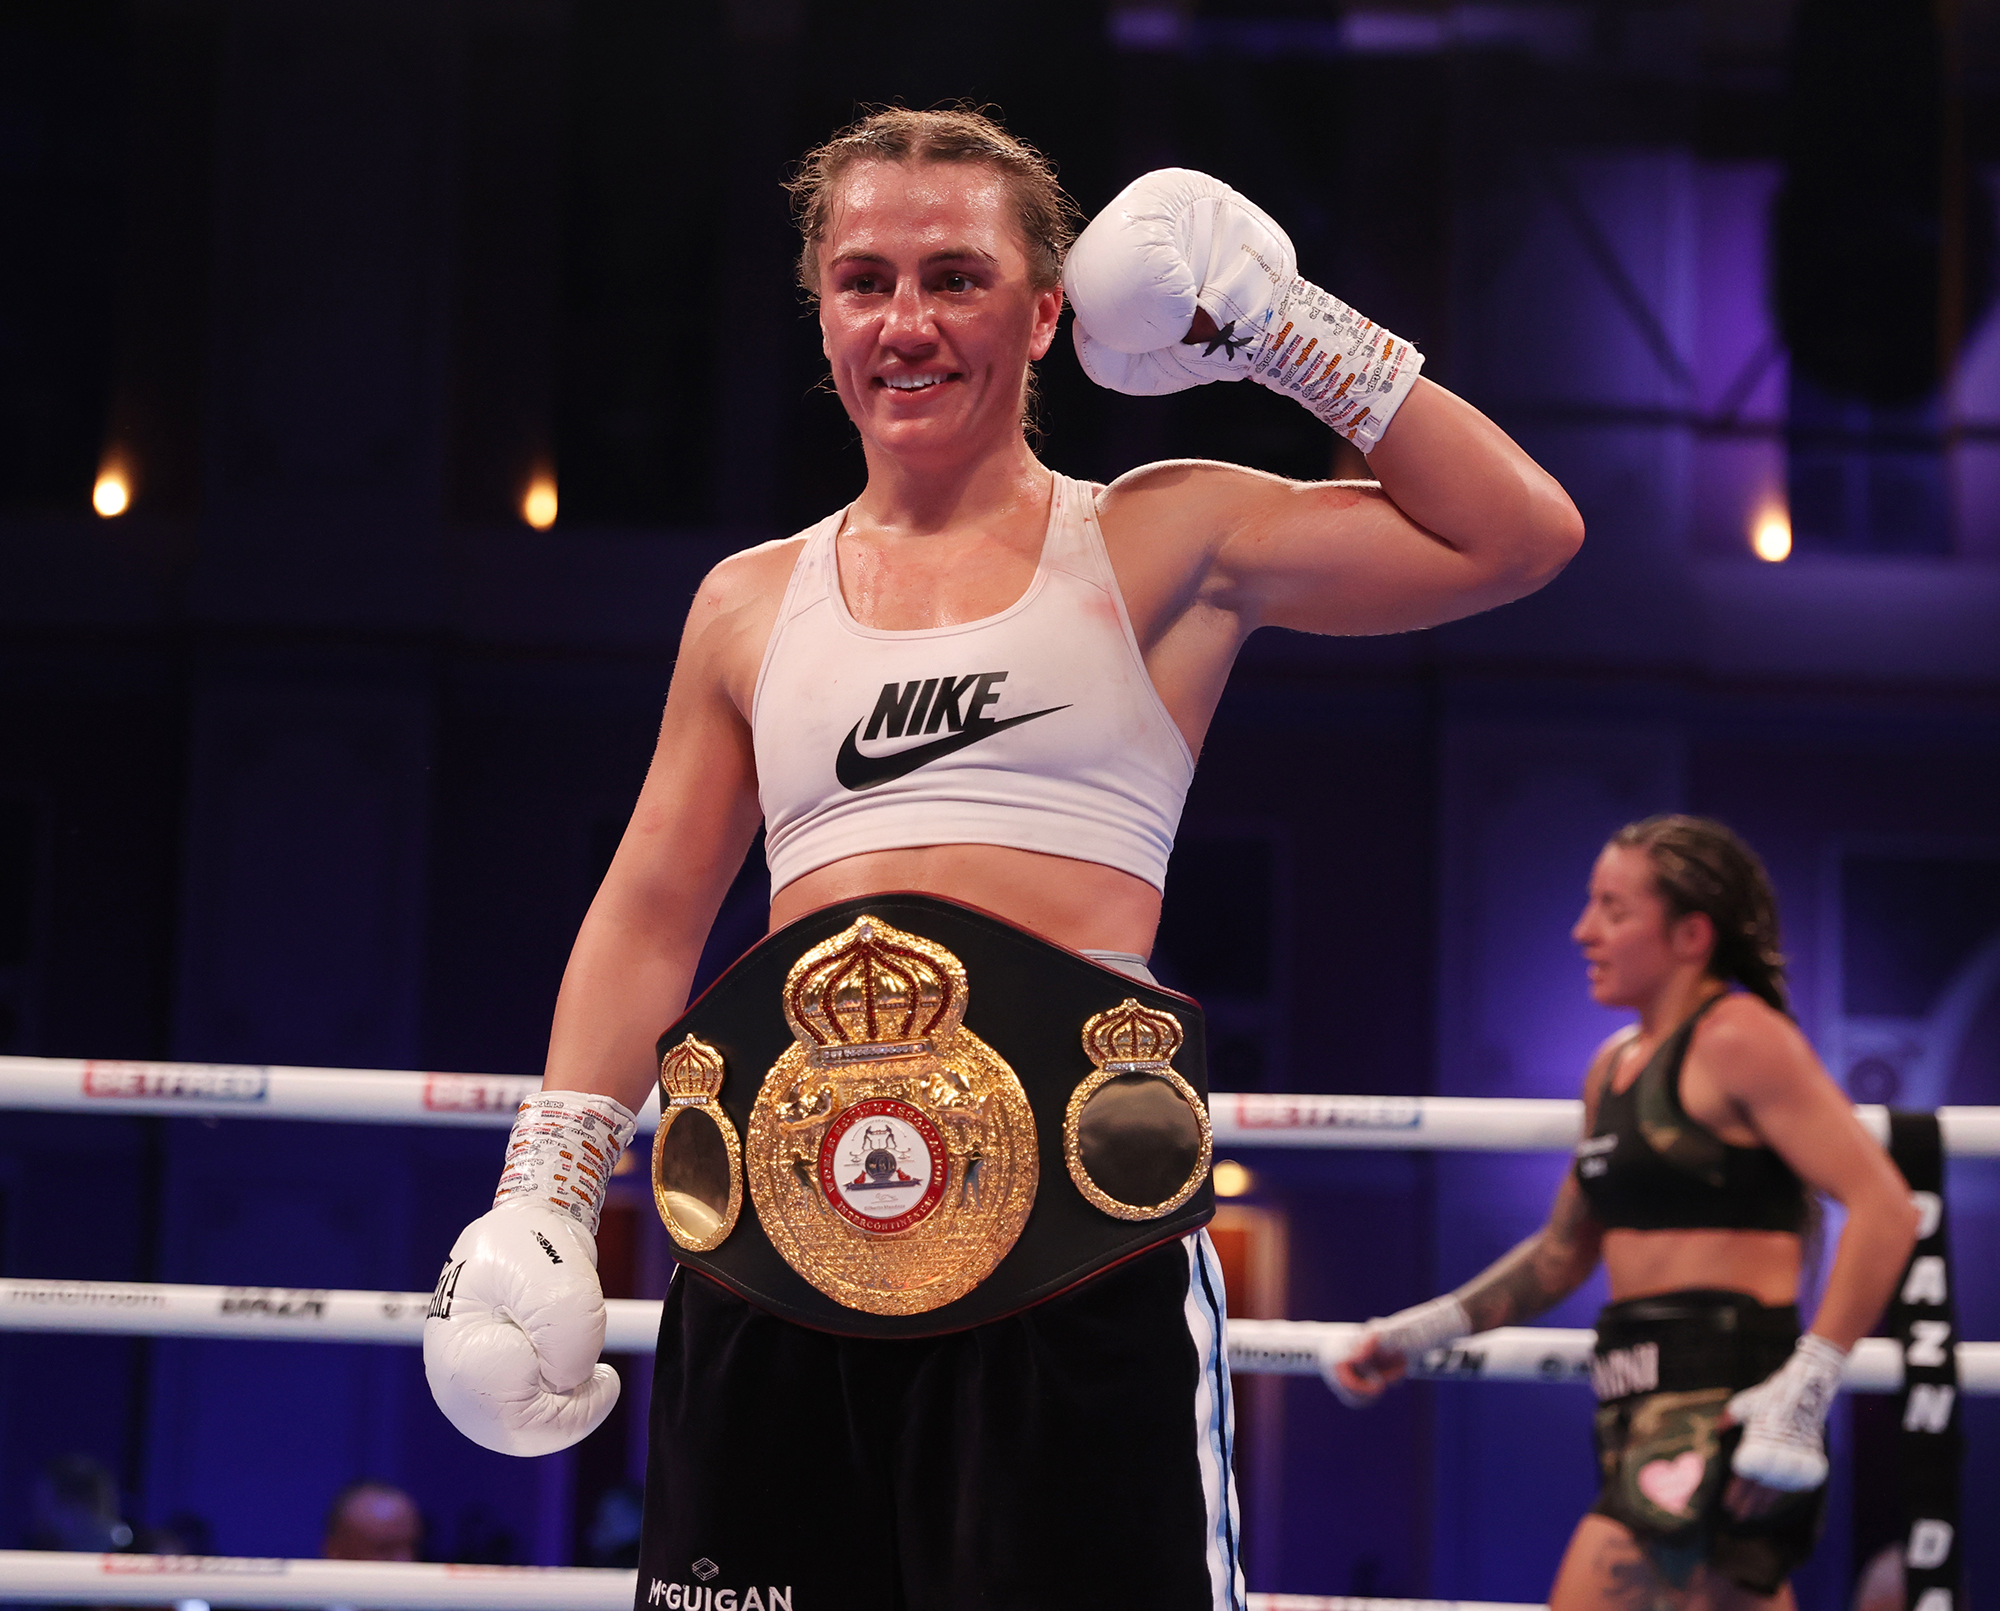 Scotney defends her WBA Intercontinental belt on May 21 against Roman 